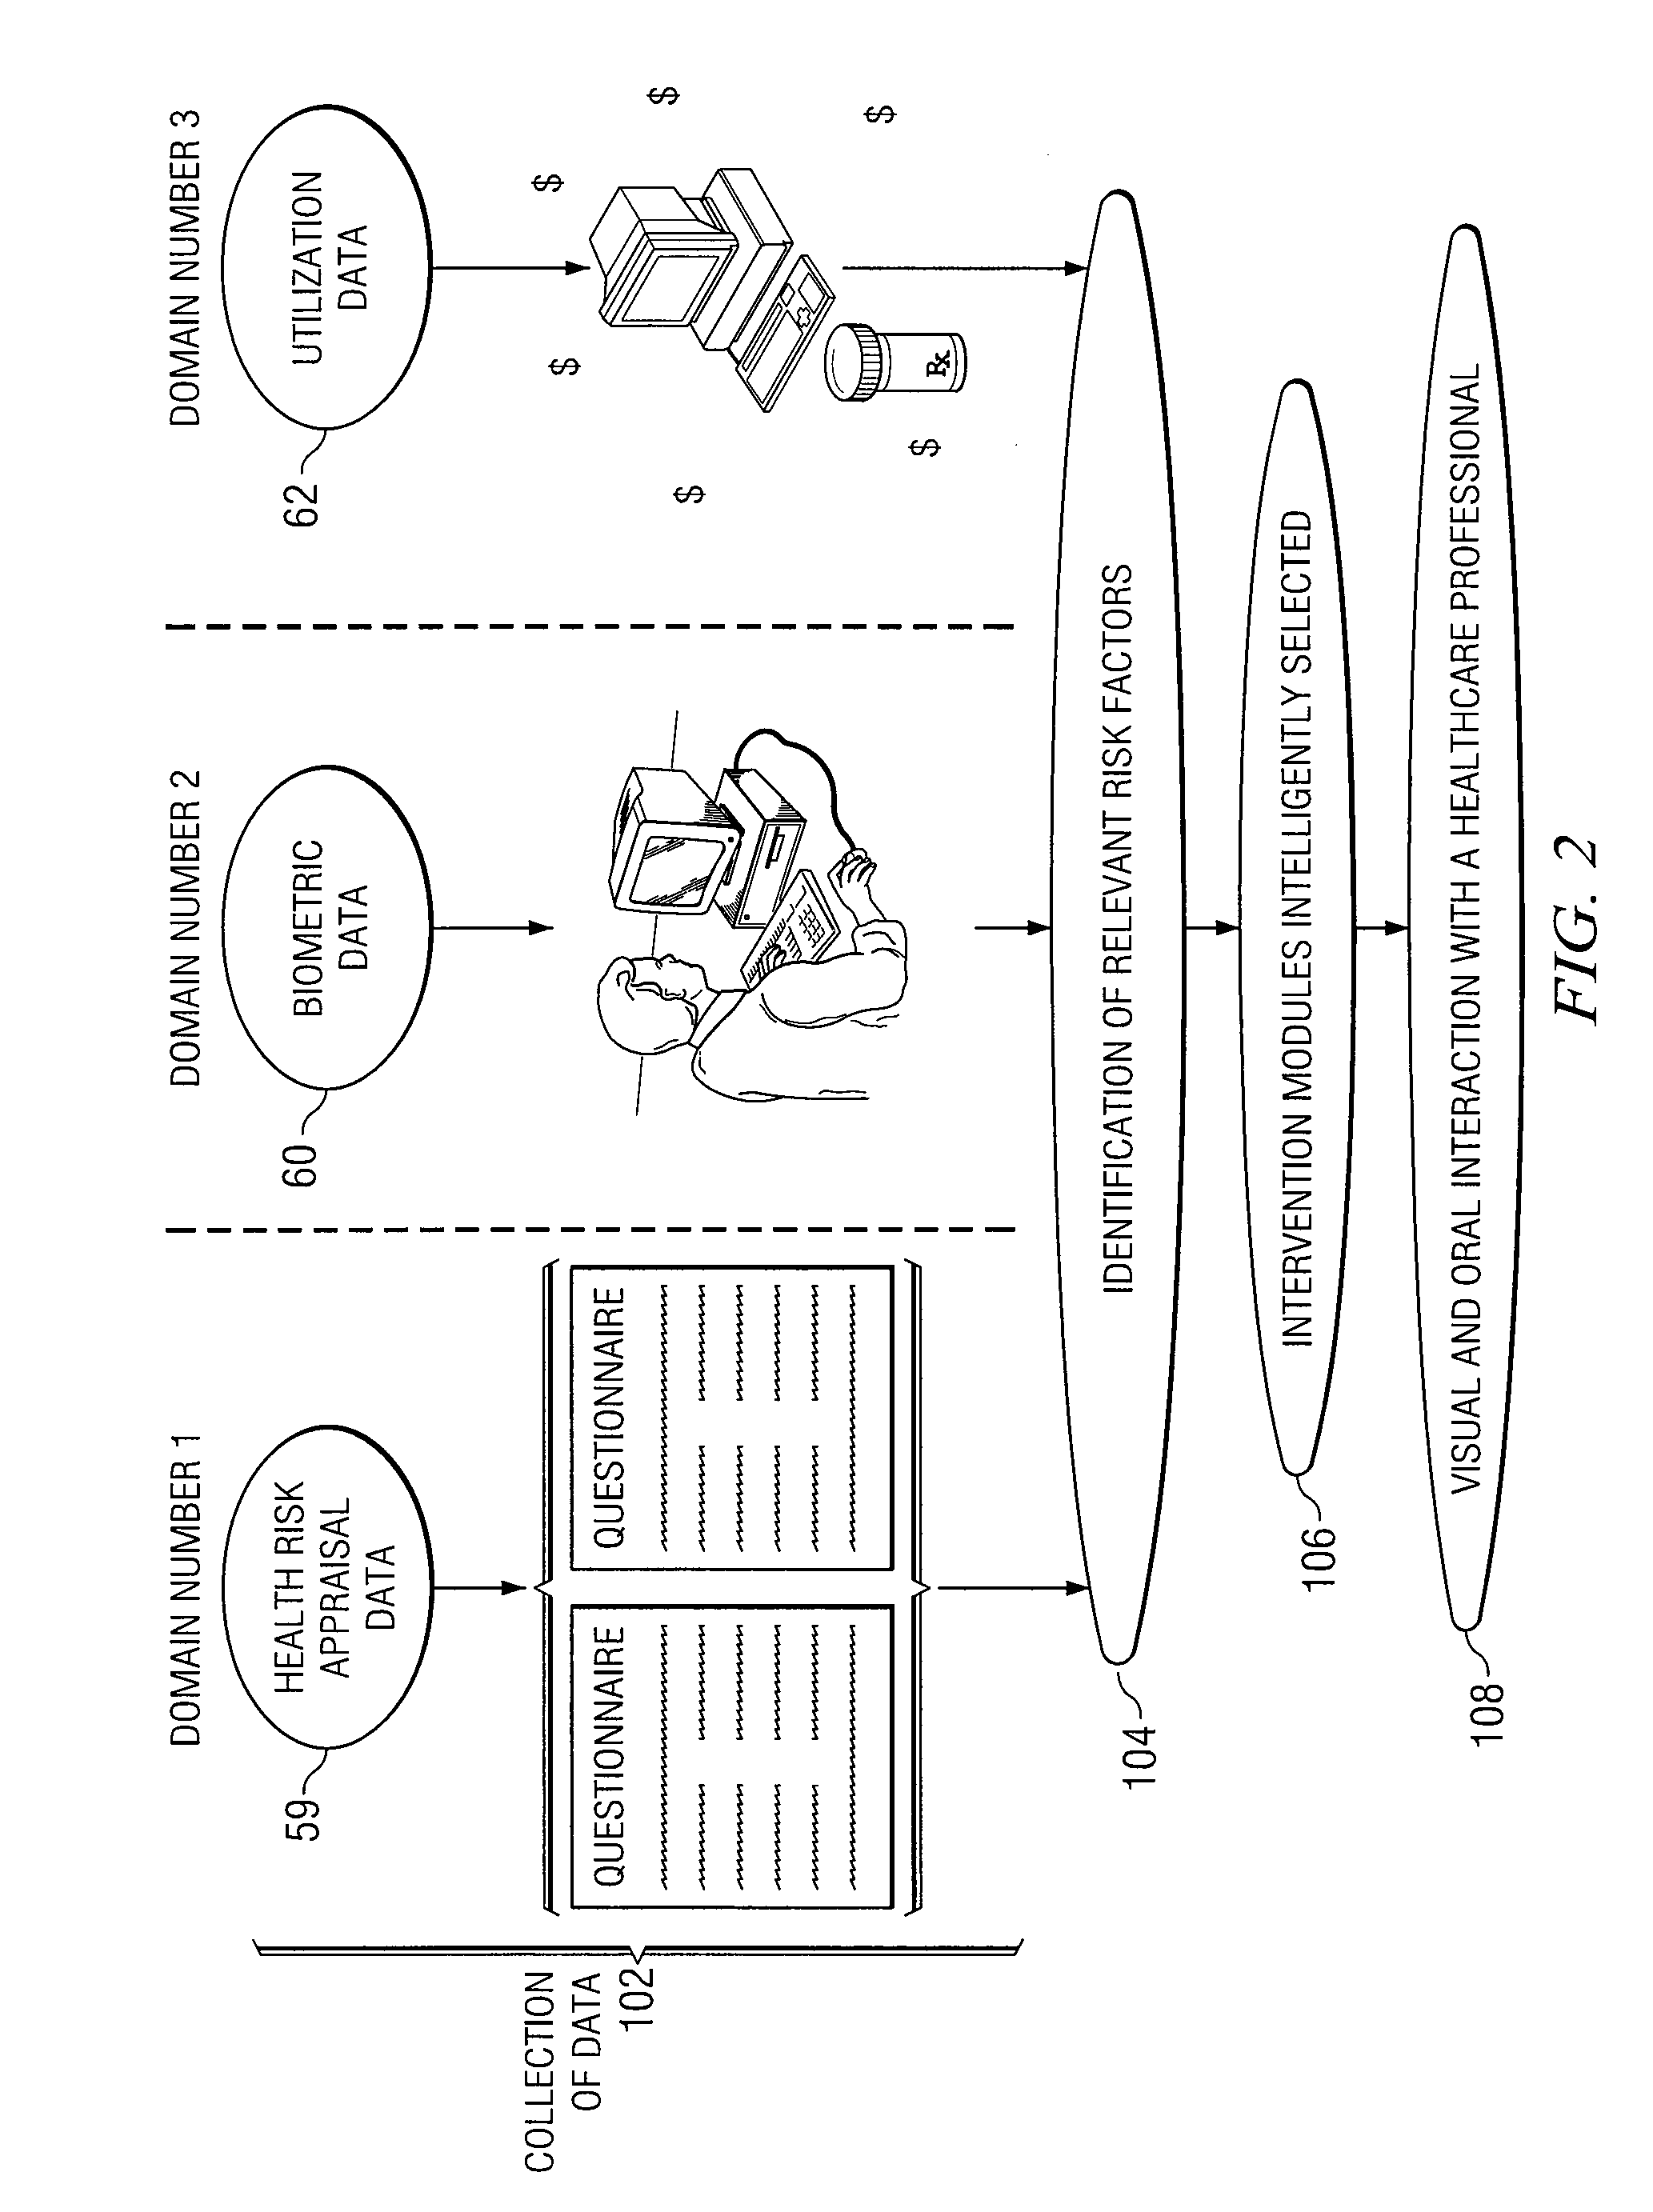 System and Method for Incentivizing a Healthcare Individual Through Music Distribution